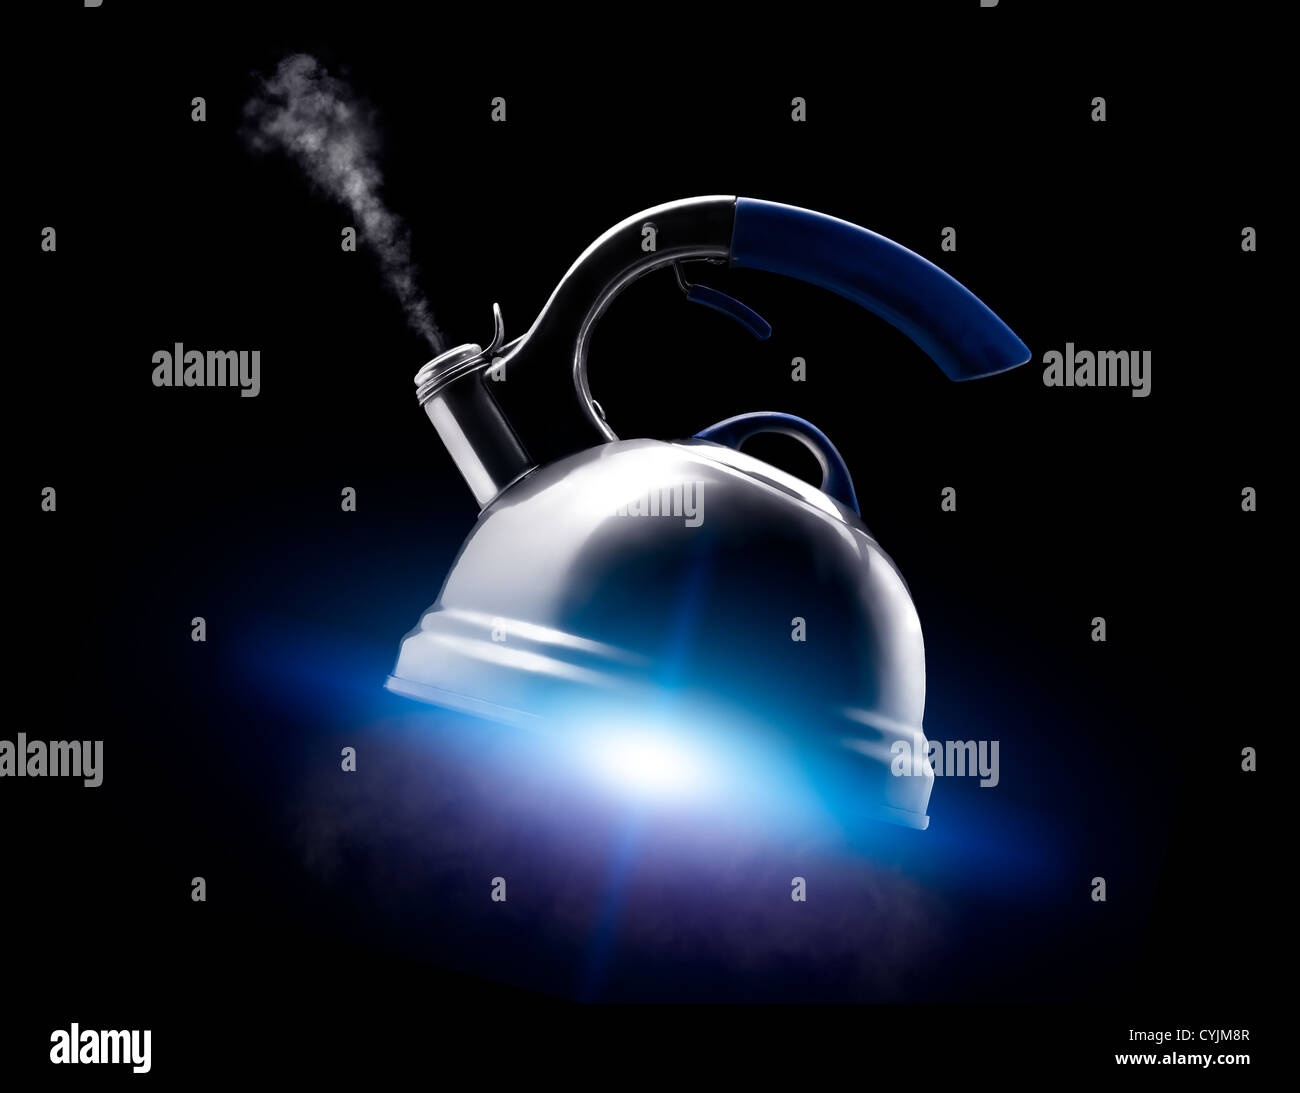 Tea kettle with boiling water on black background. Blue glow like from the spaceship's engine under the kettle. Stock Photo